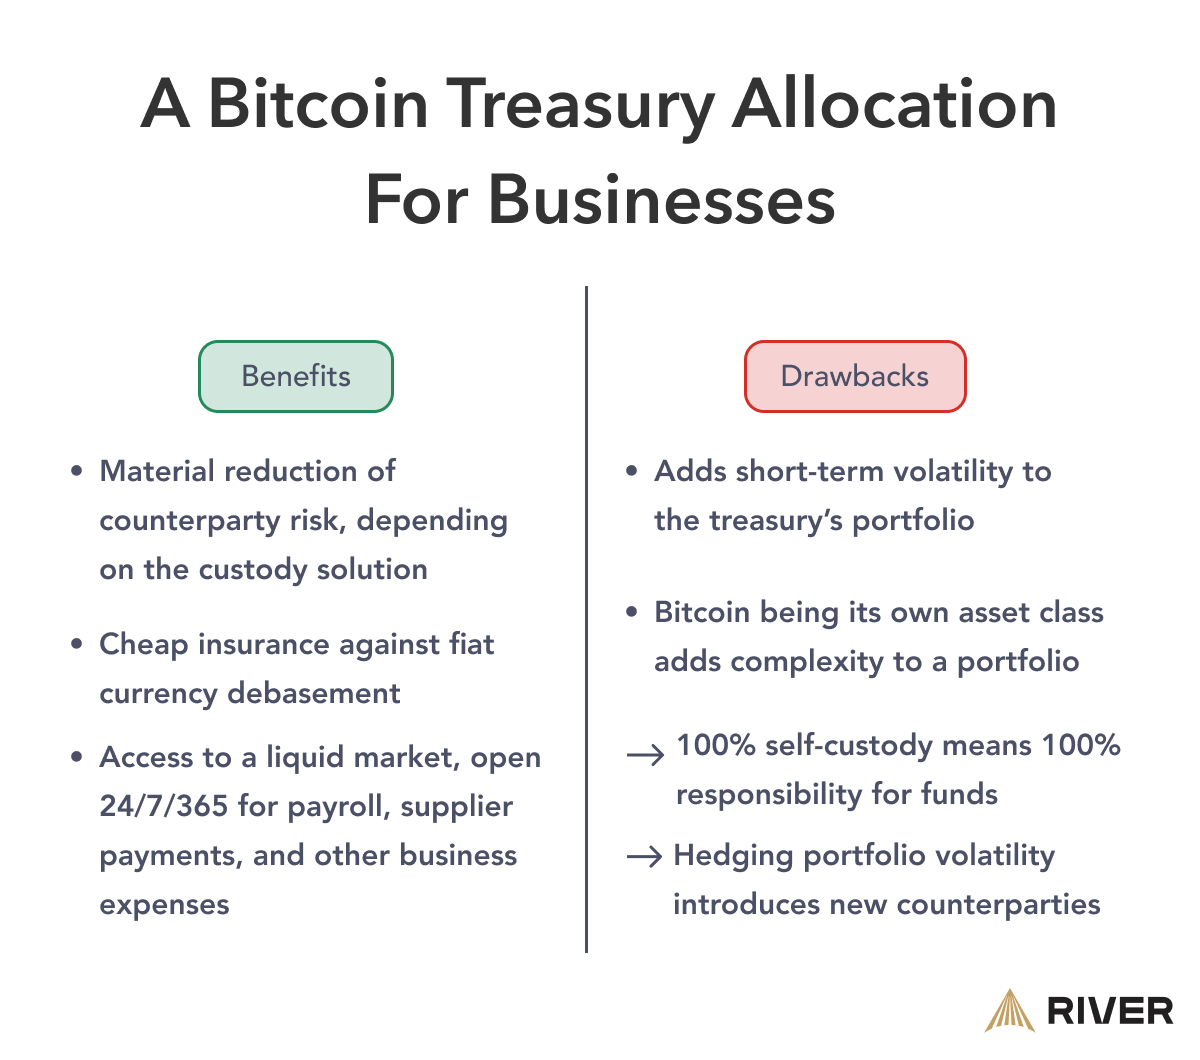 Pros and Cons of institutional treasuries allocating to bitcoin